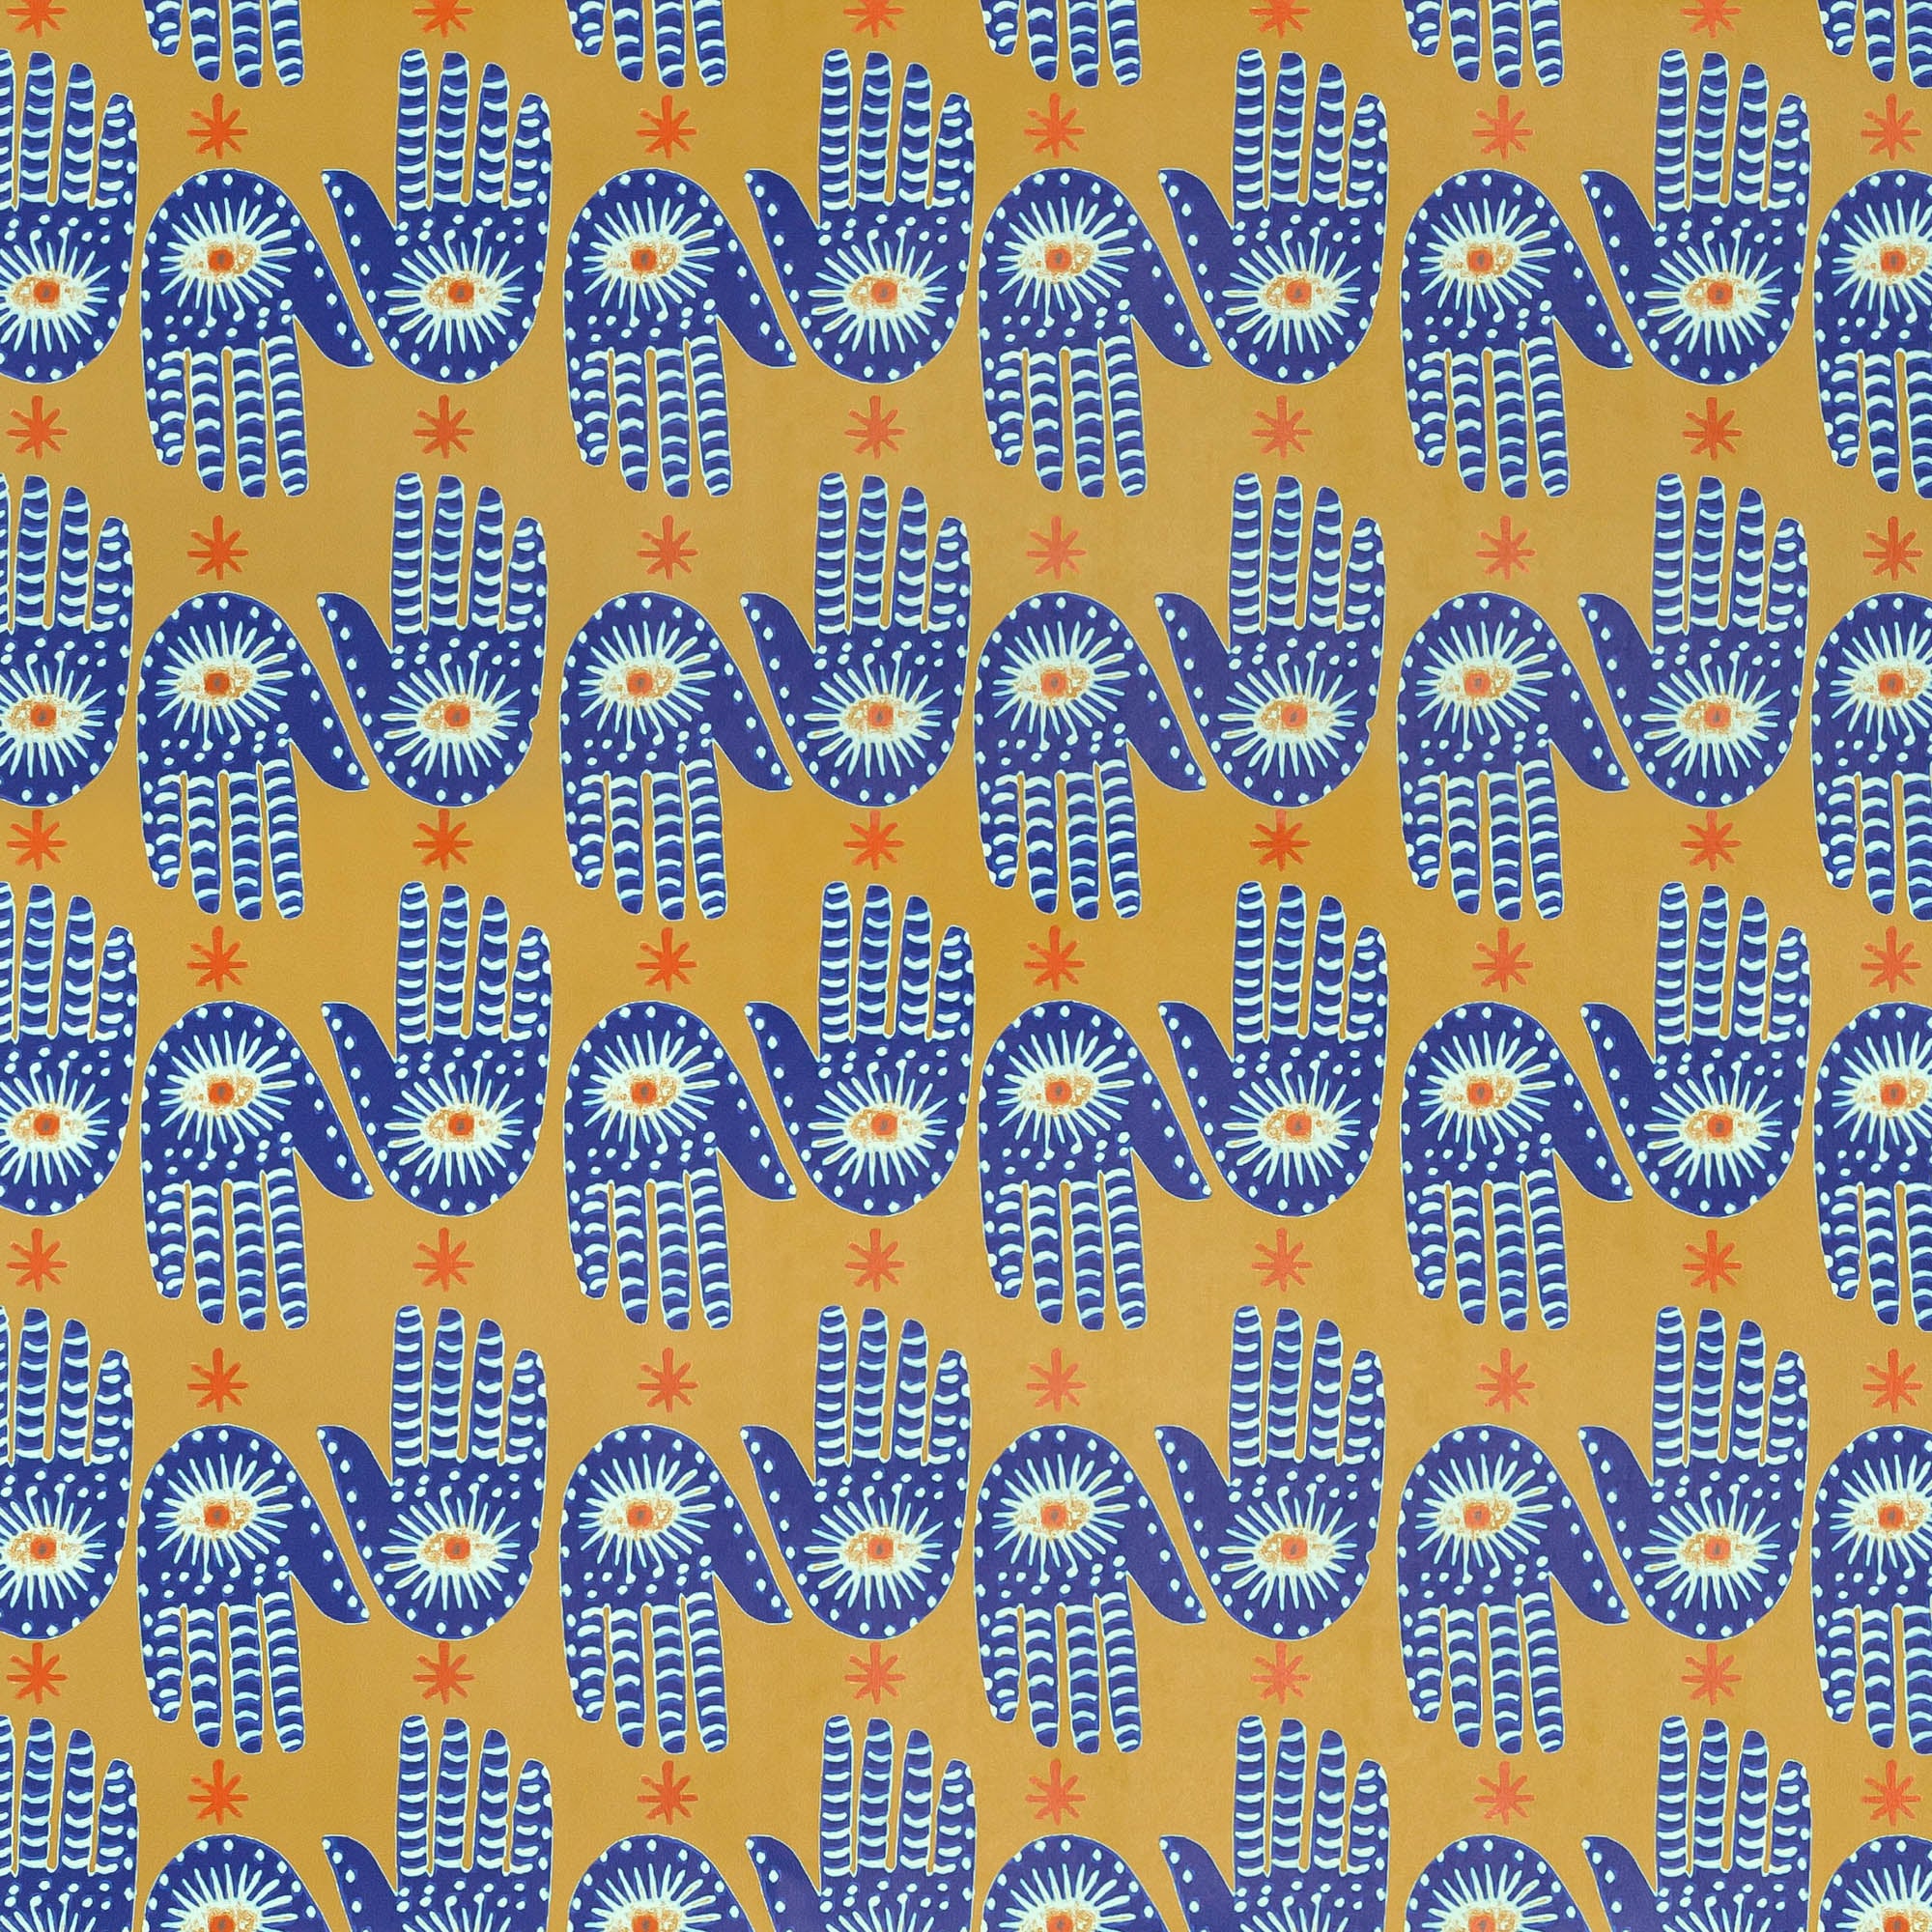 Detail of wallpaper in a playful hamsa hand print in blue, yellow and orange on a yellow field.